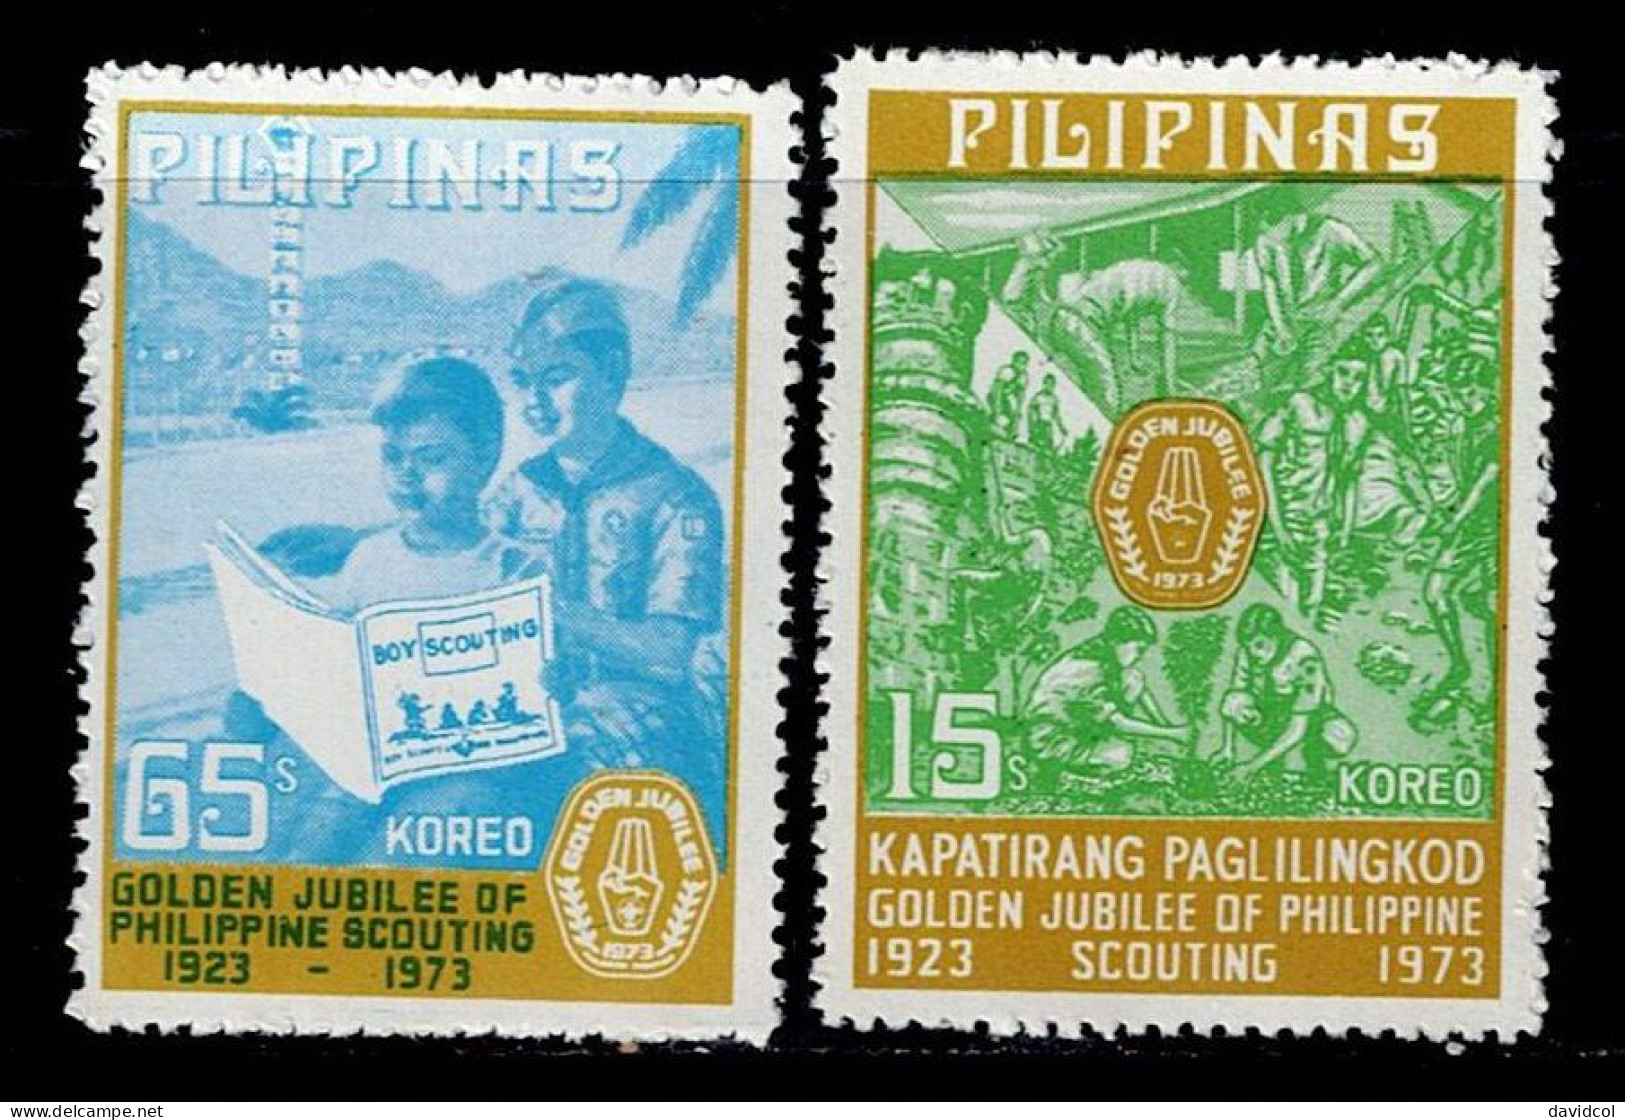 FIL-04- PHILIPPINES - 1973 - MNH -SCOUTS- GOLDEN JUBILEE OF PHILIPPINE SCOUTING - Filipinas